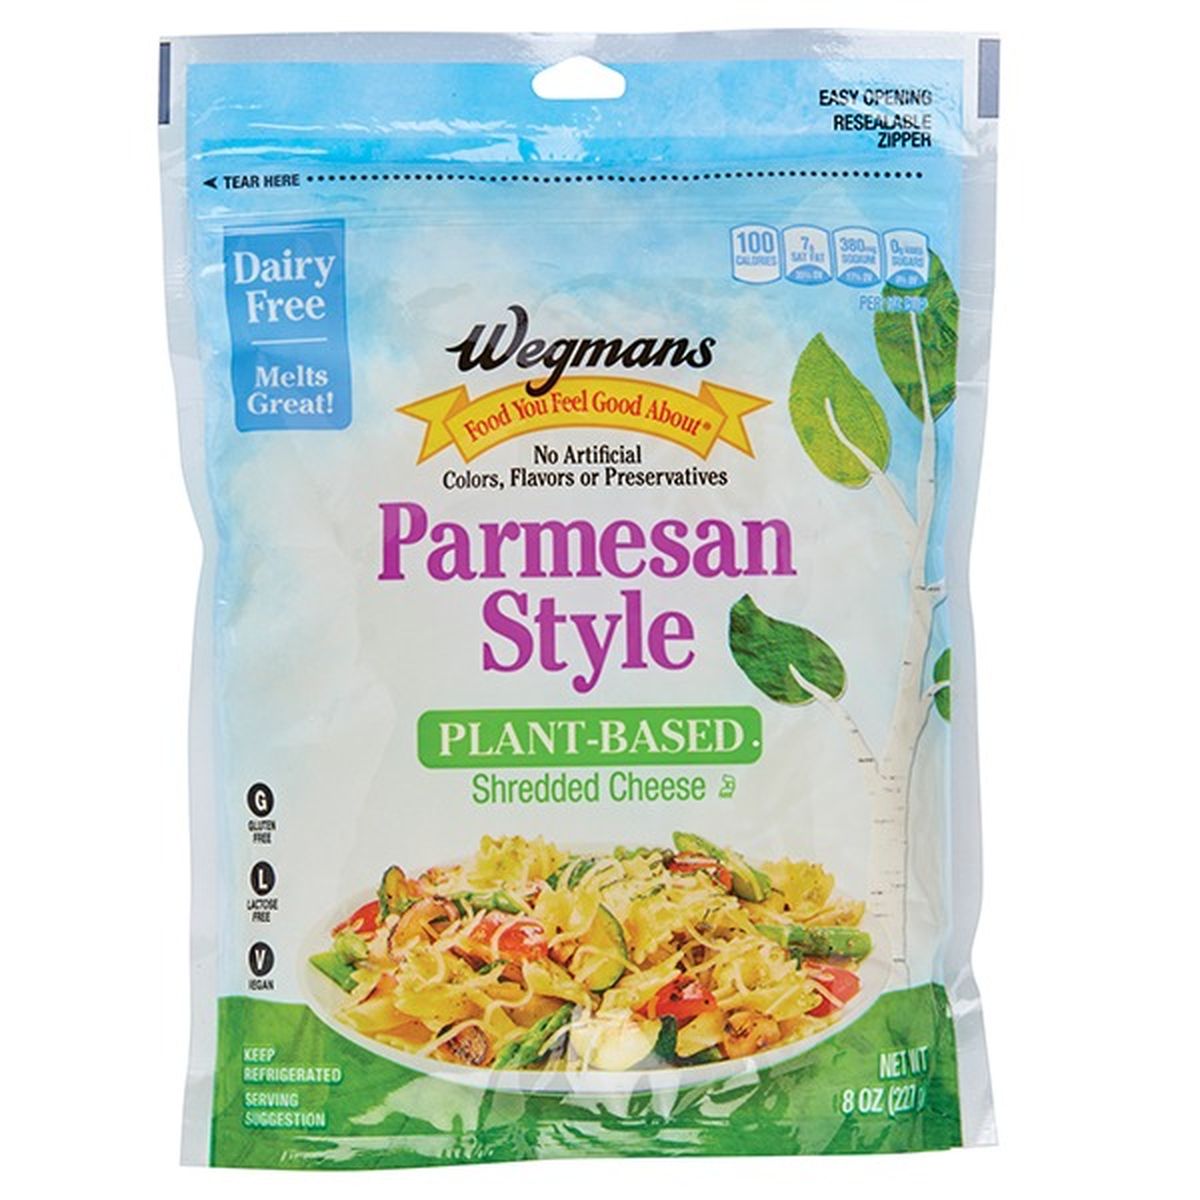 Calories in Wegmans Parmesan Style Plant Based Shredded Cheese